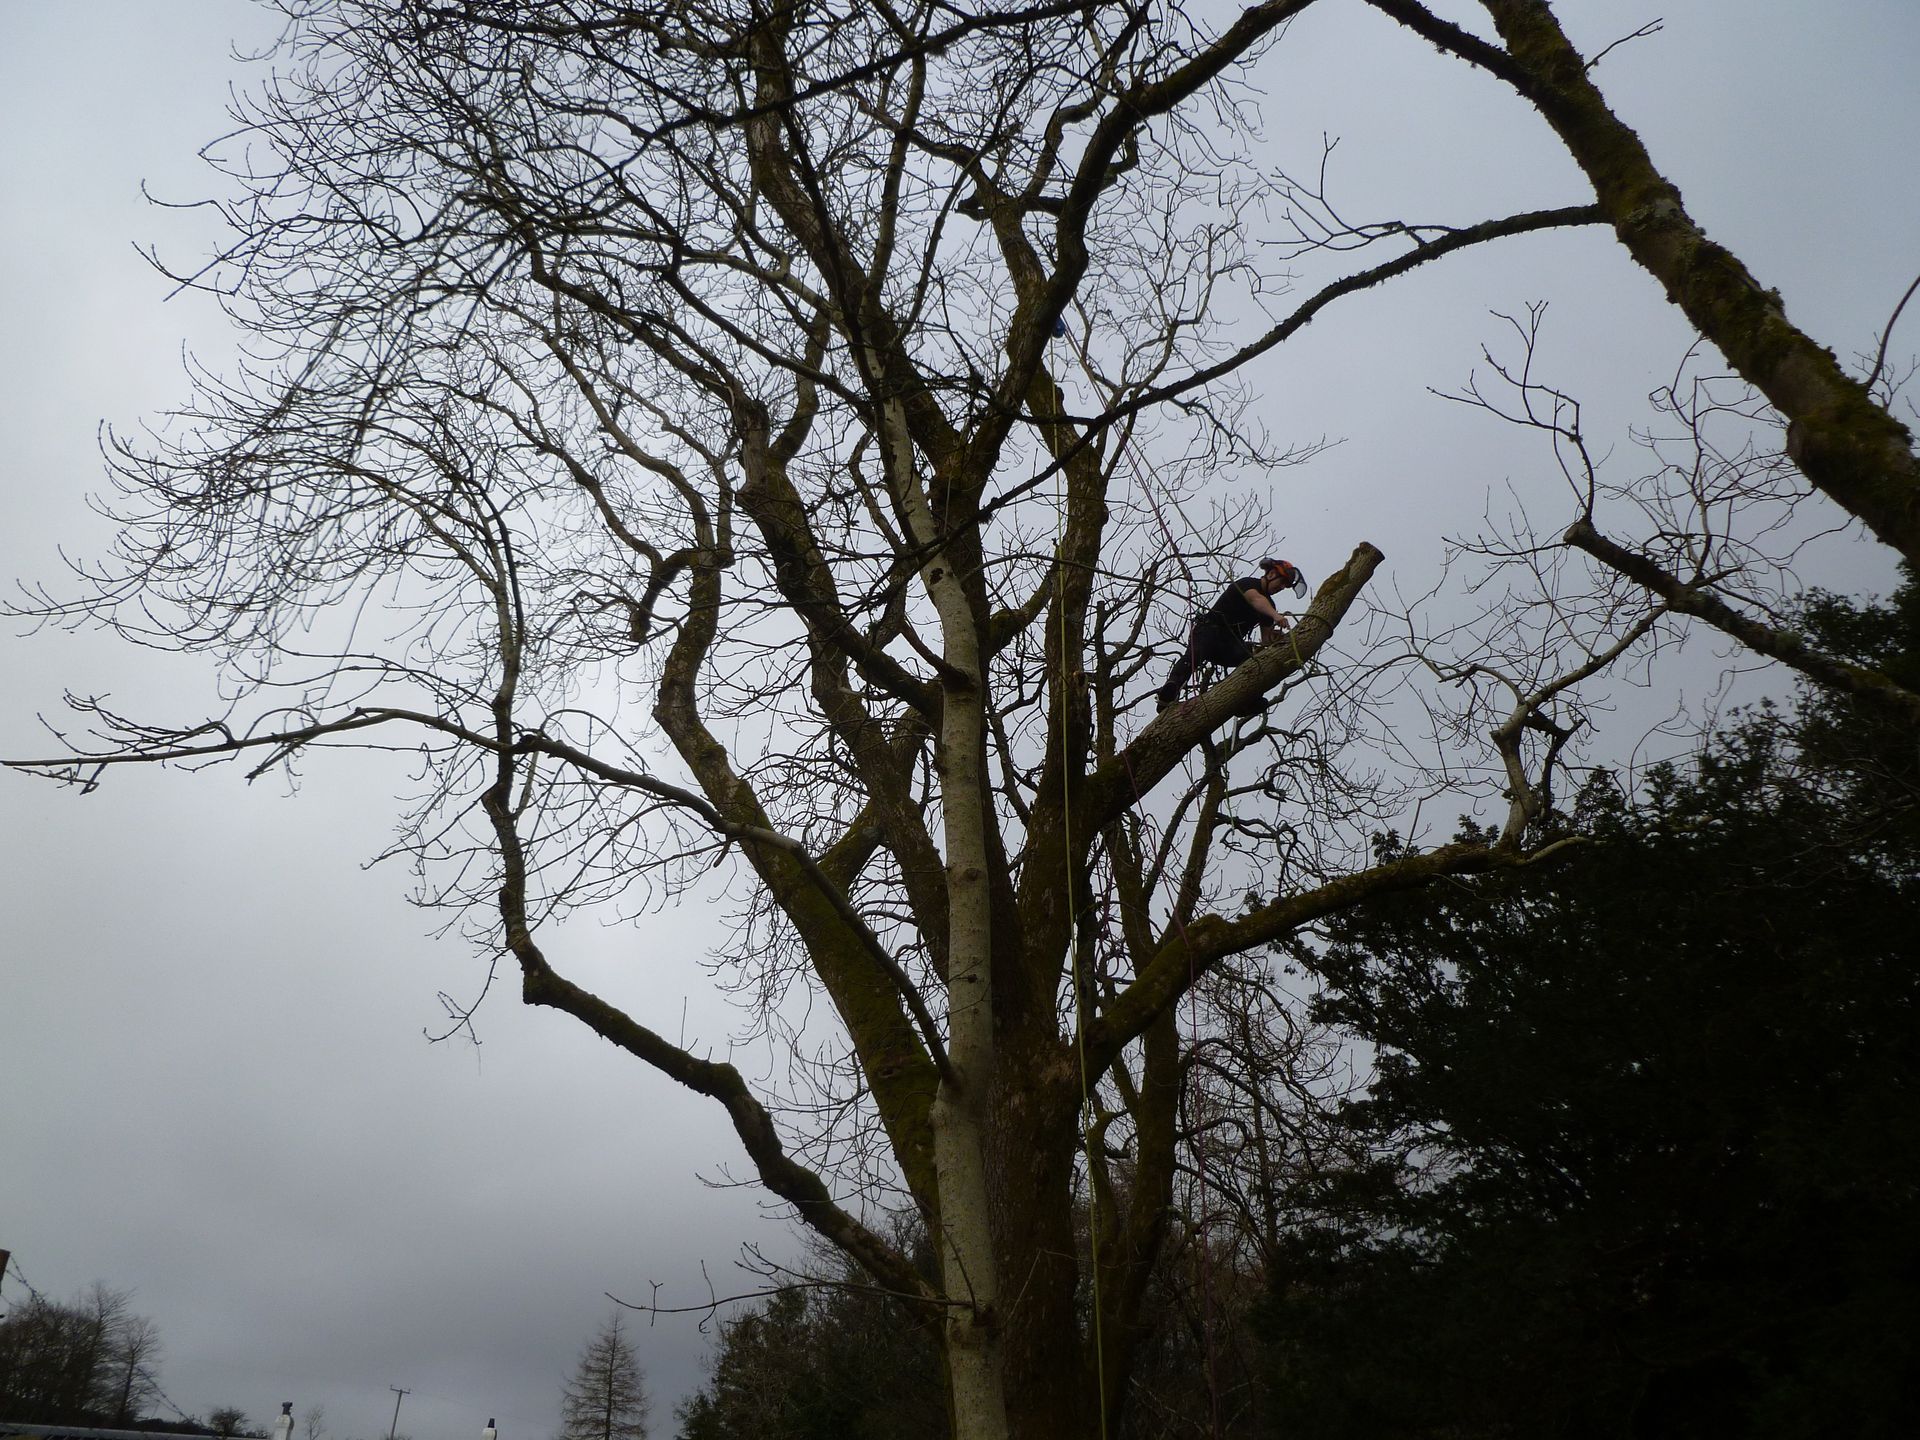 Dangerous Ash branch nearly removed.